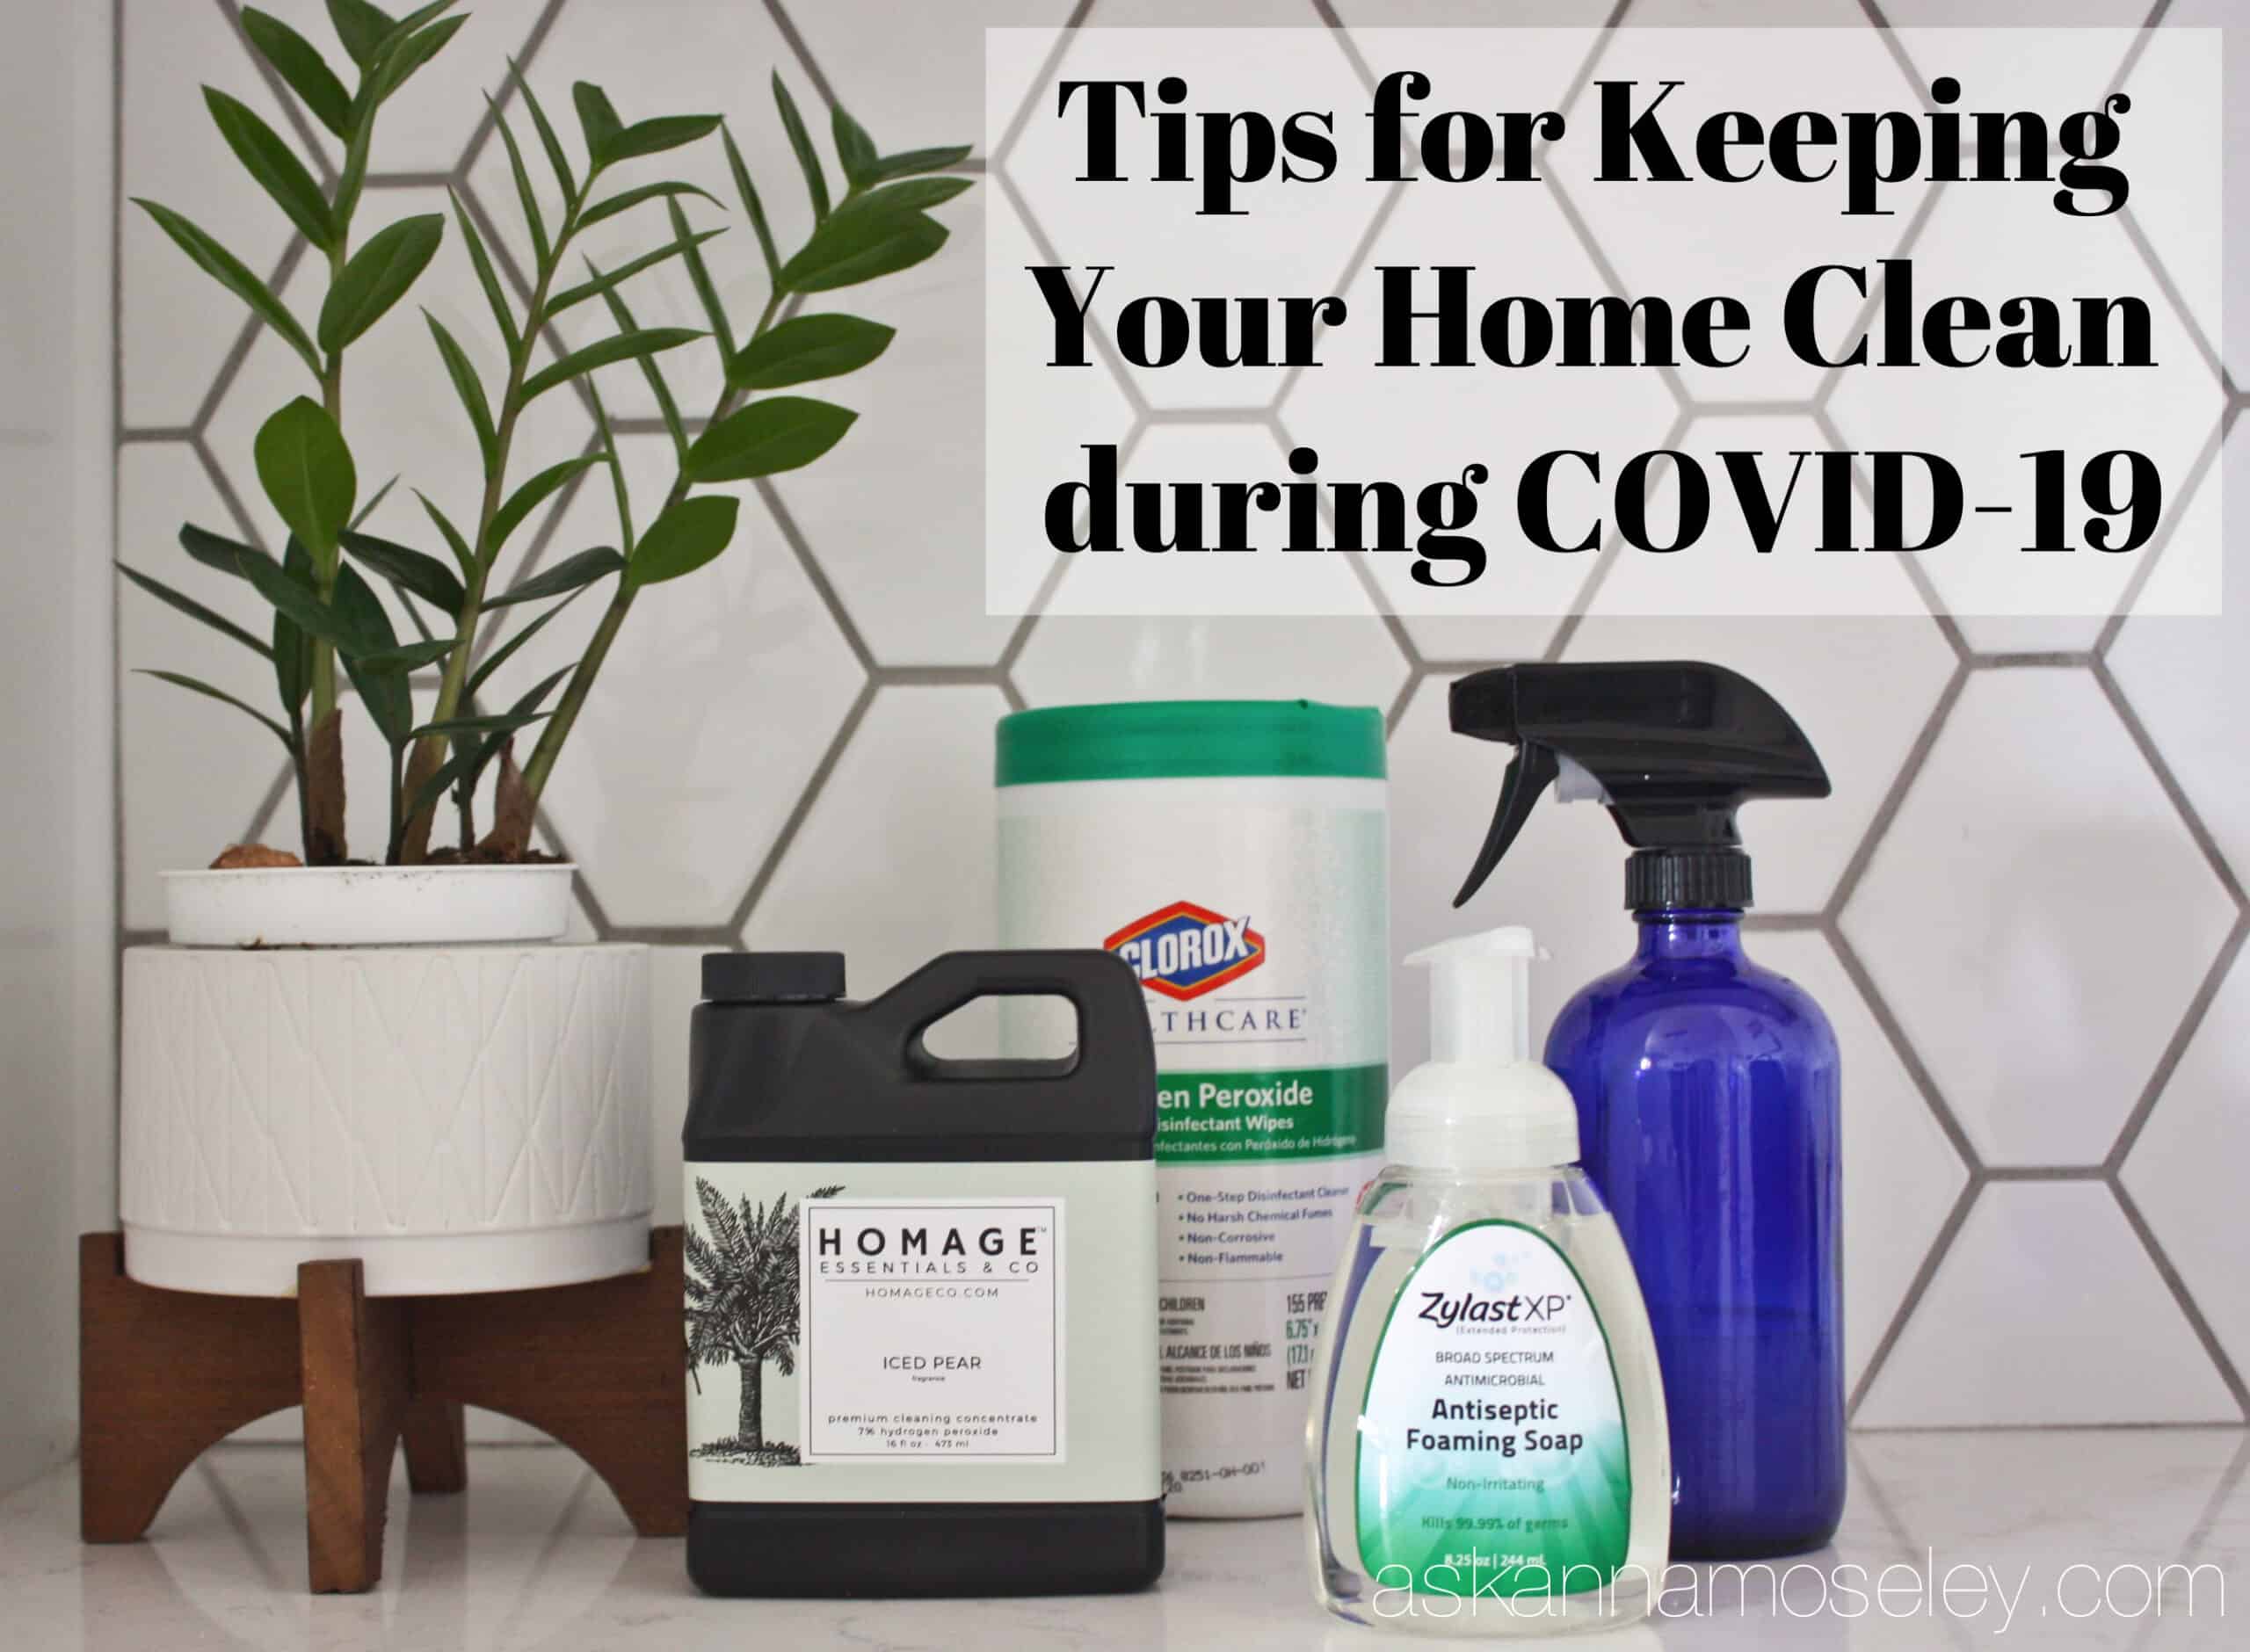 Tips for Keeping Your Home Clean During COVID-19